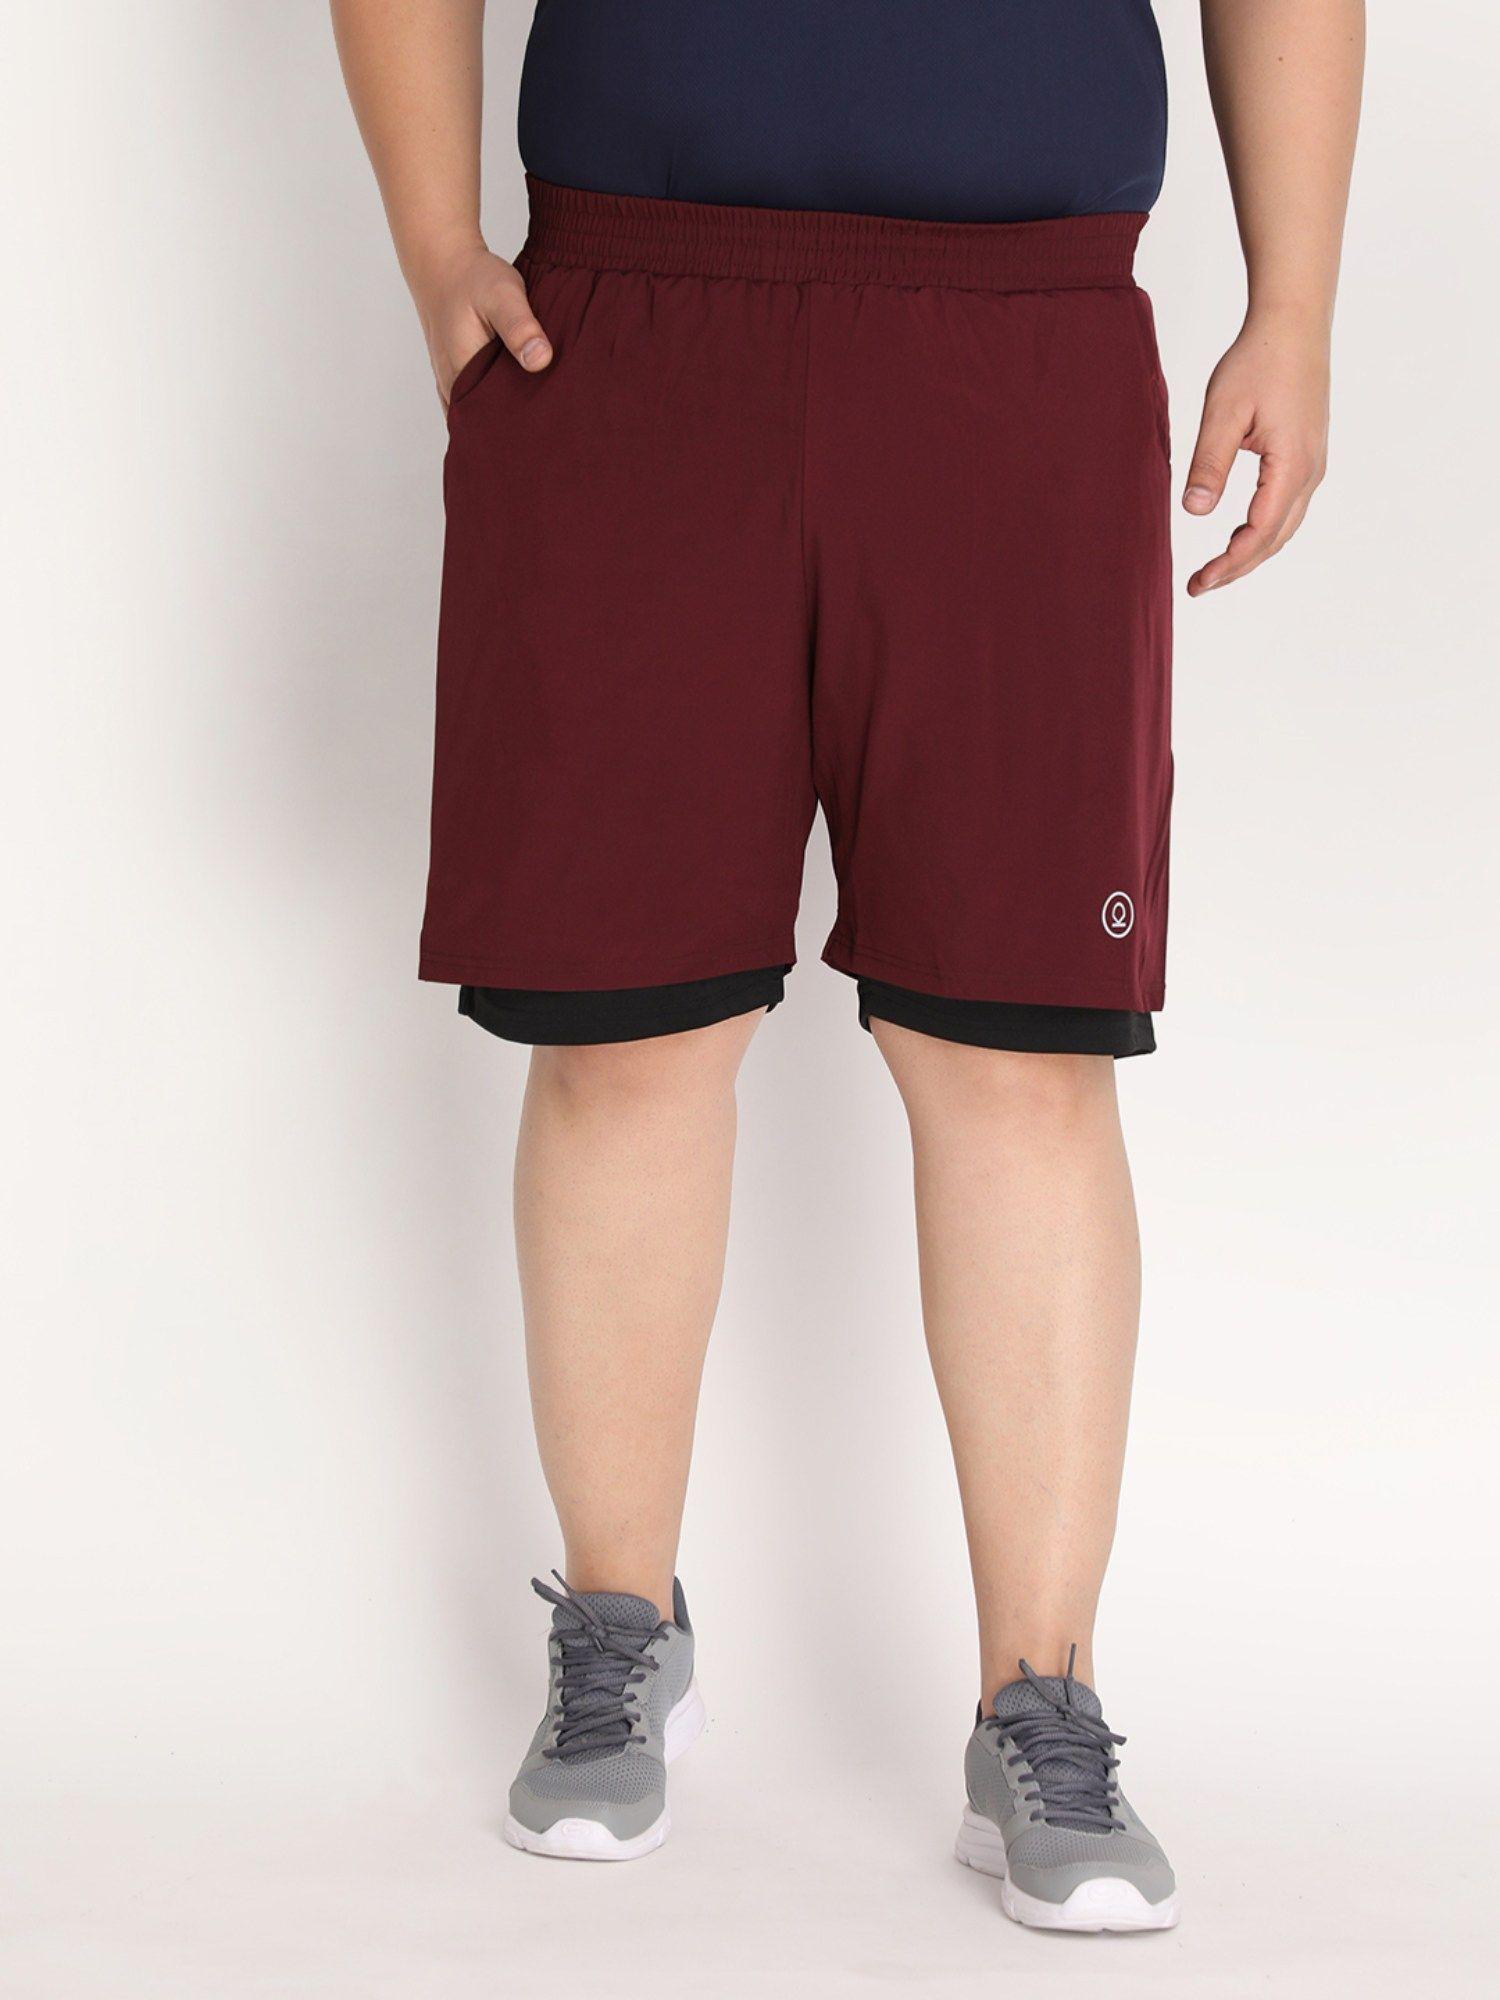 men-sports-workout-gym-shorts-basketball-in-maroon